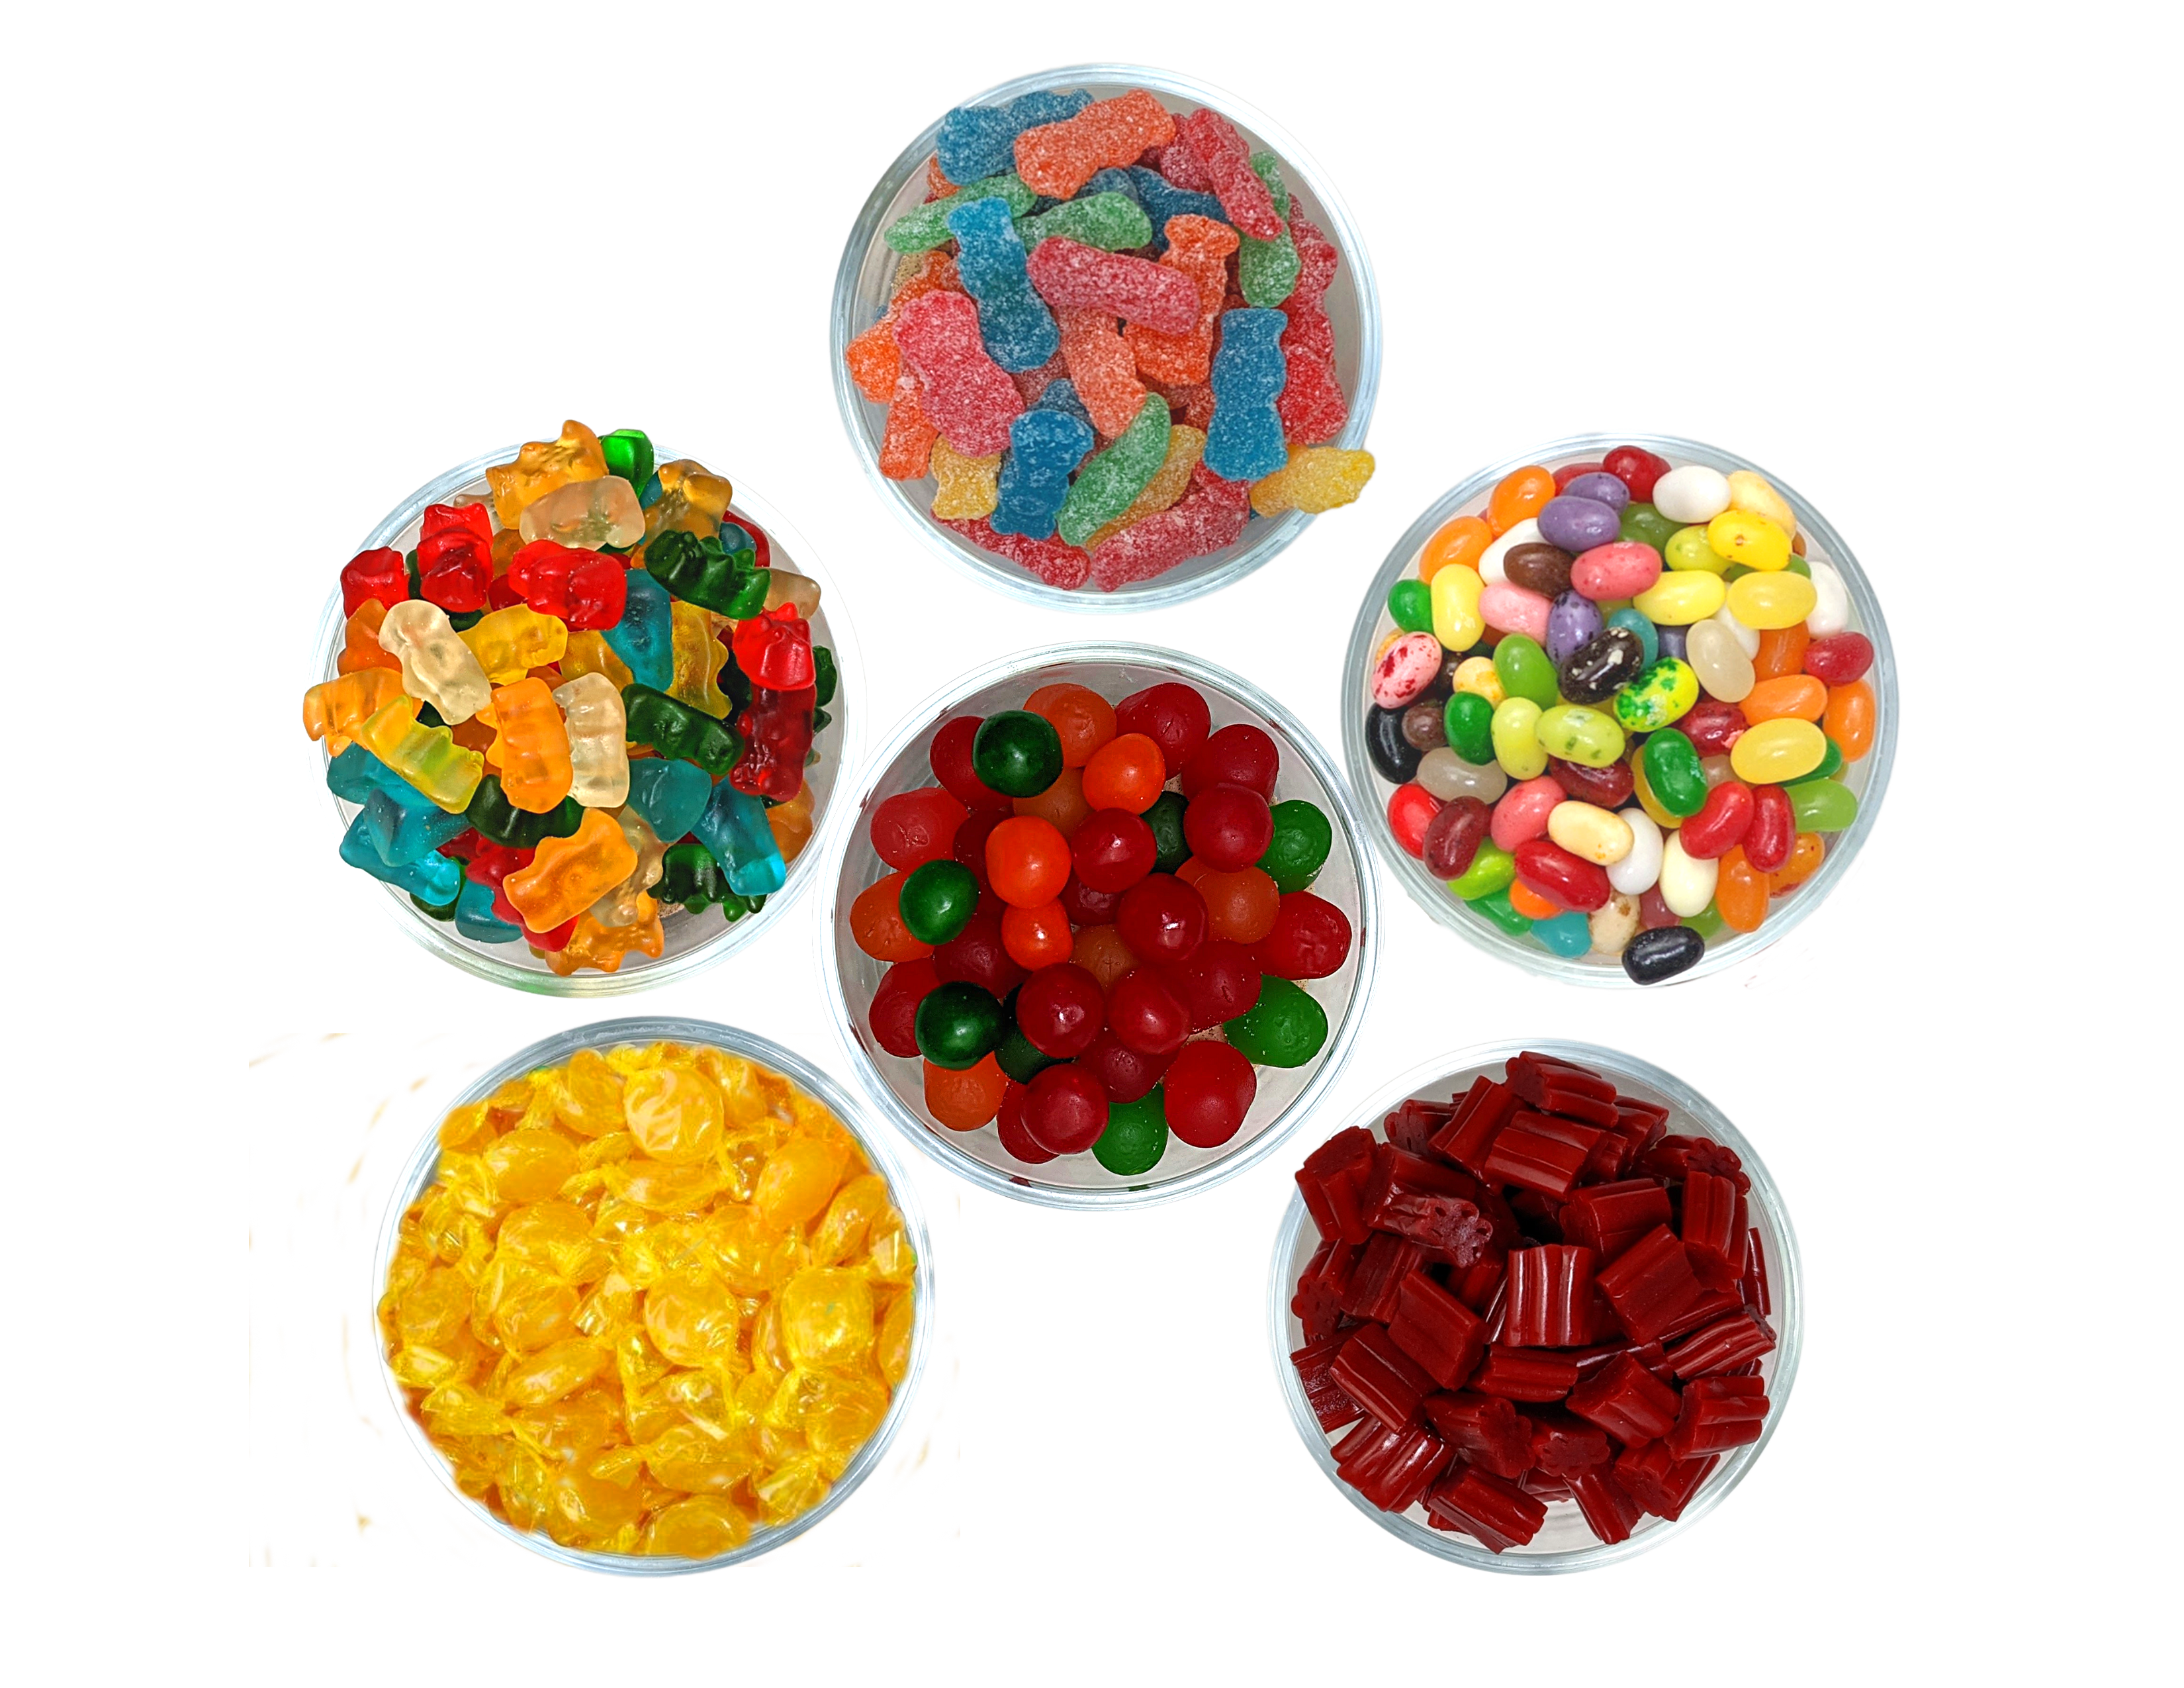 corporate gifts | gift boxes | corporate swag | gift ideas | butterscotch | Sour Heads | Jelly Bellys | Licorice Bites | Gummy Bears.